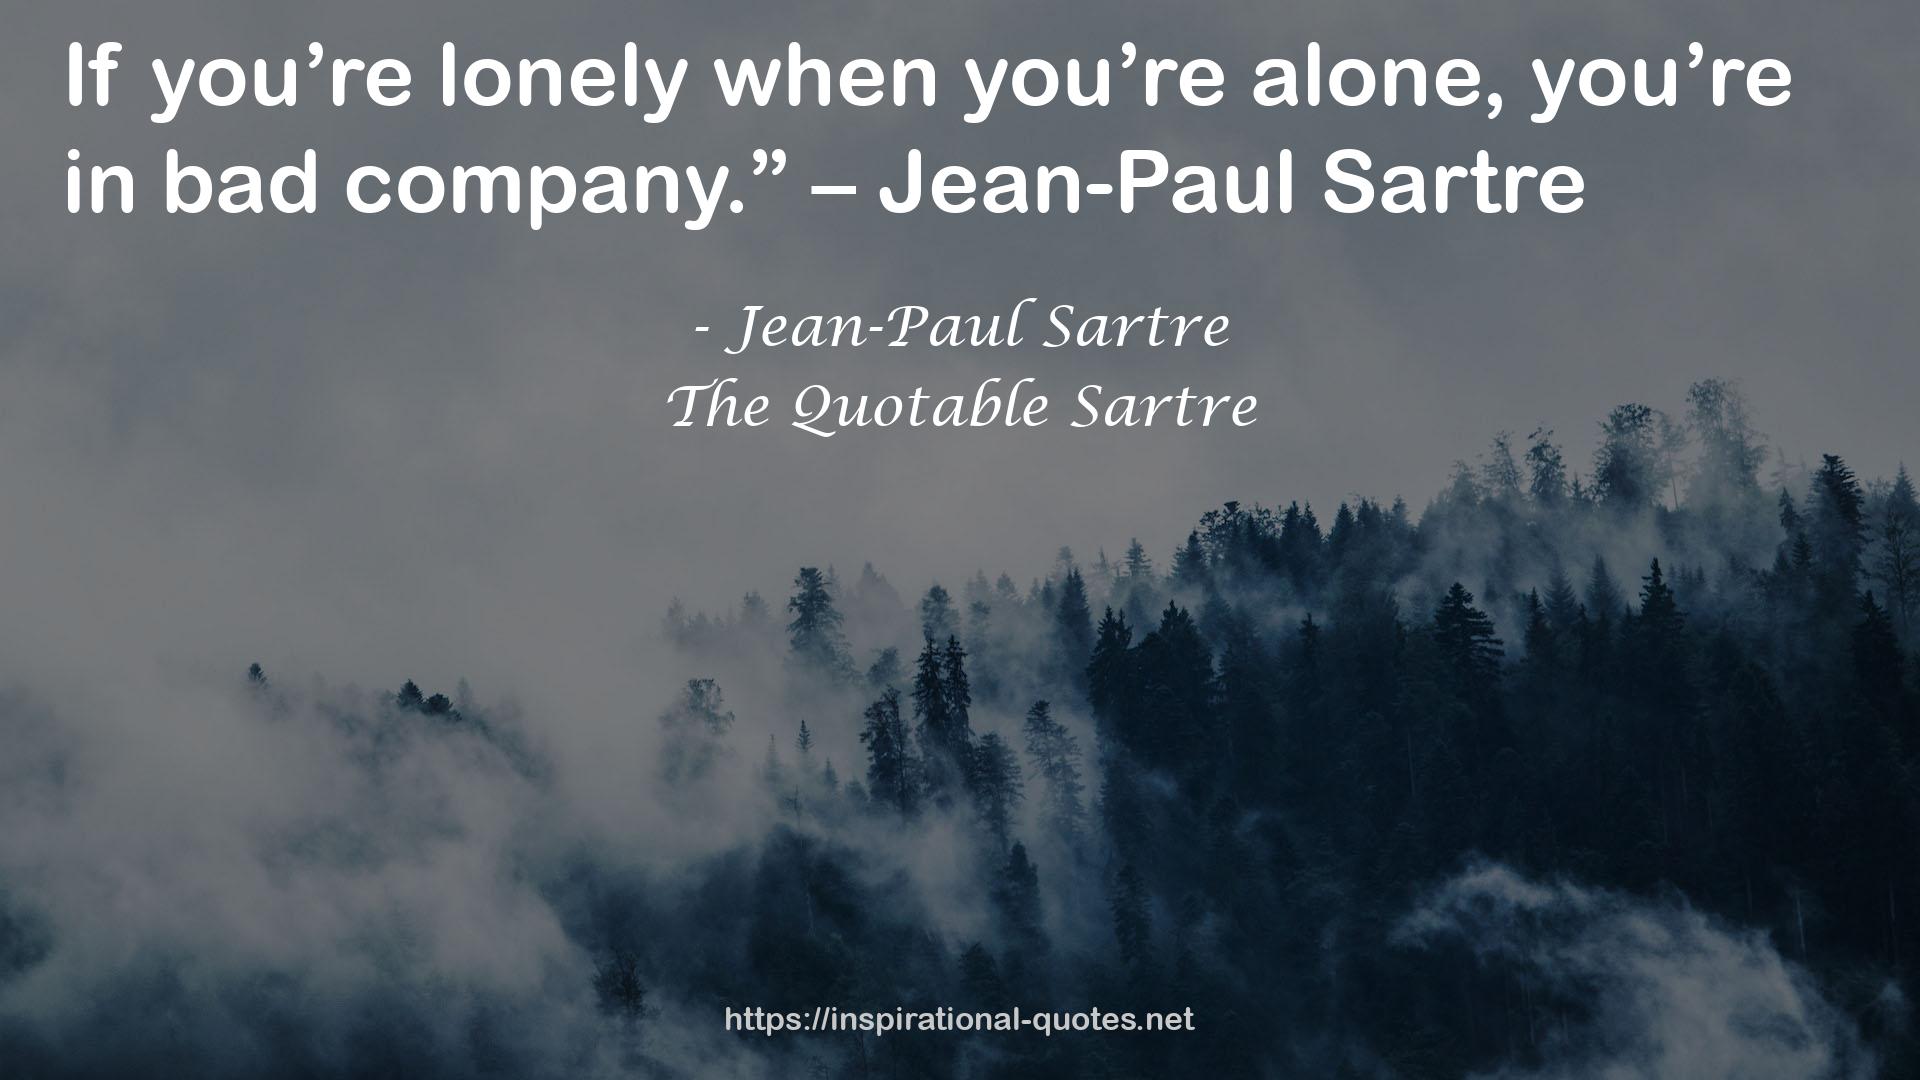 The Quotable Sartre QUOTES